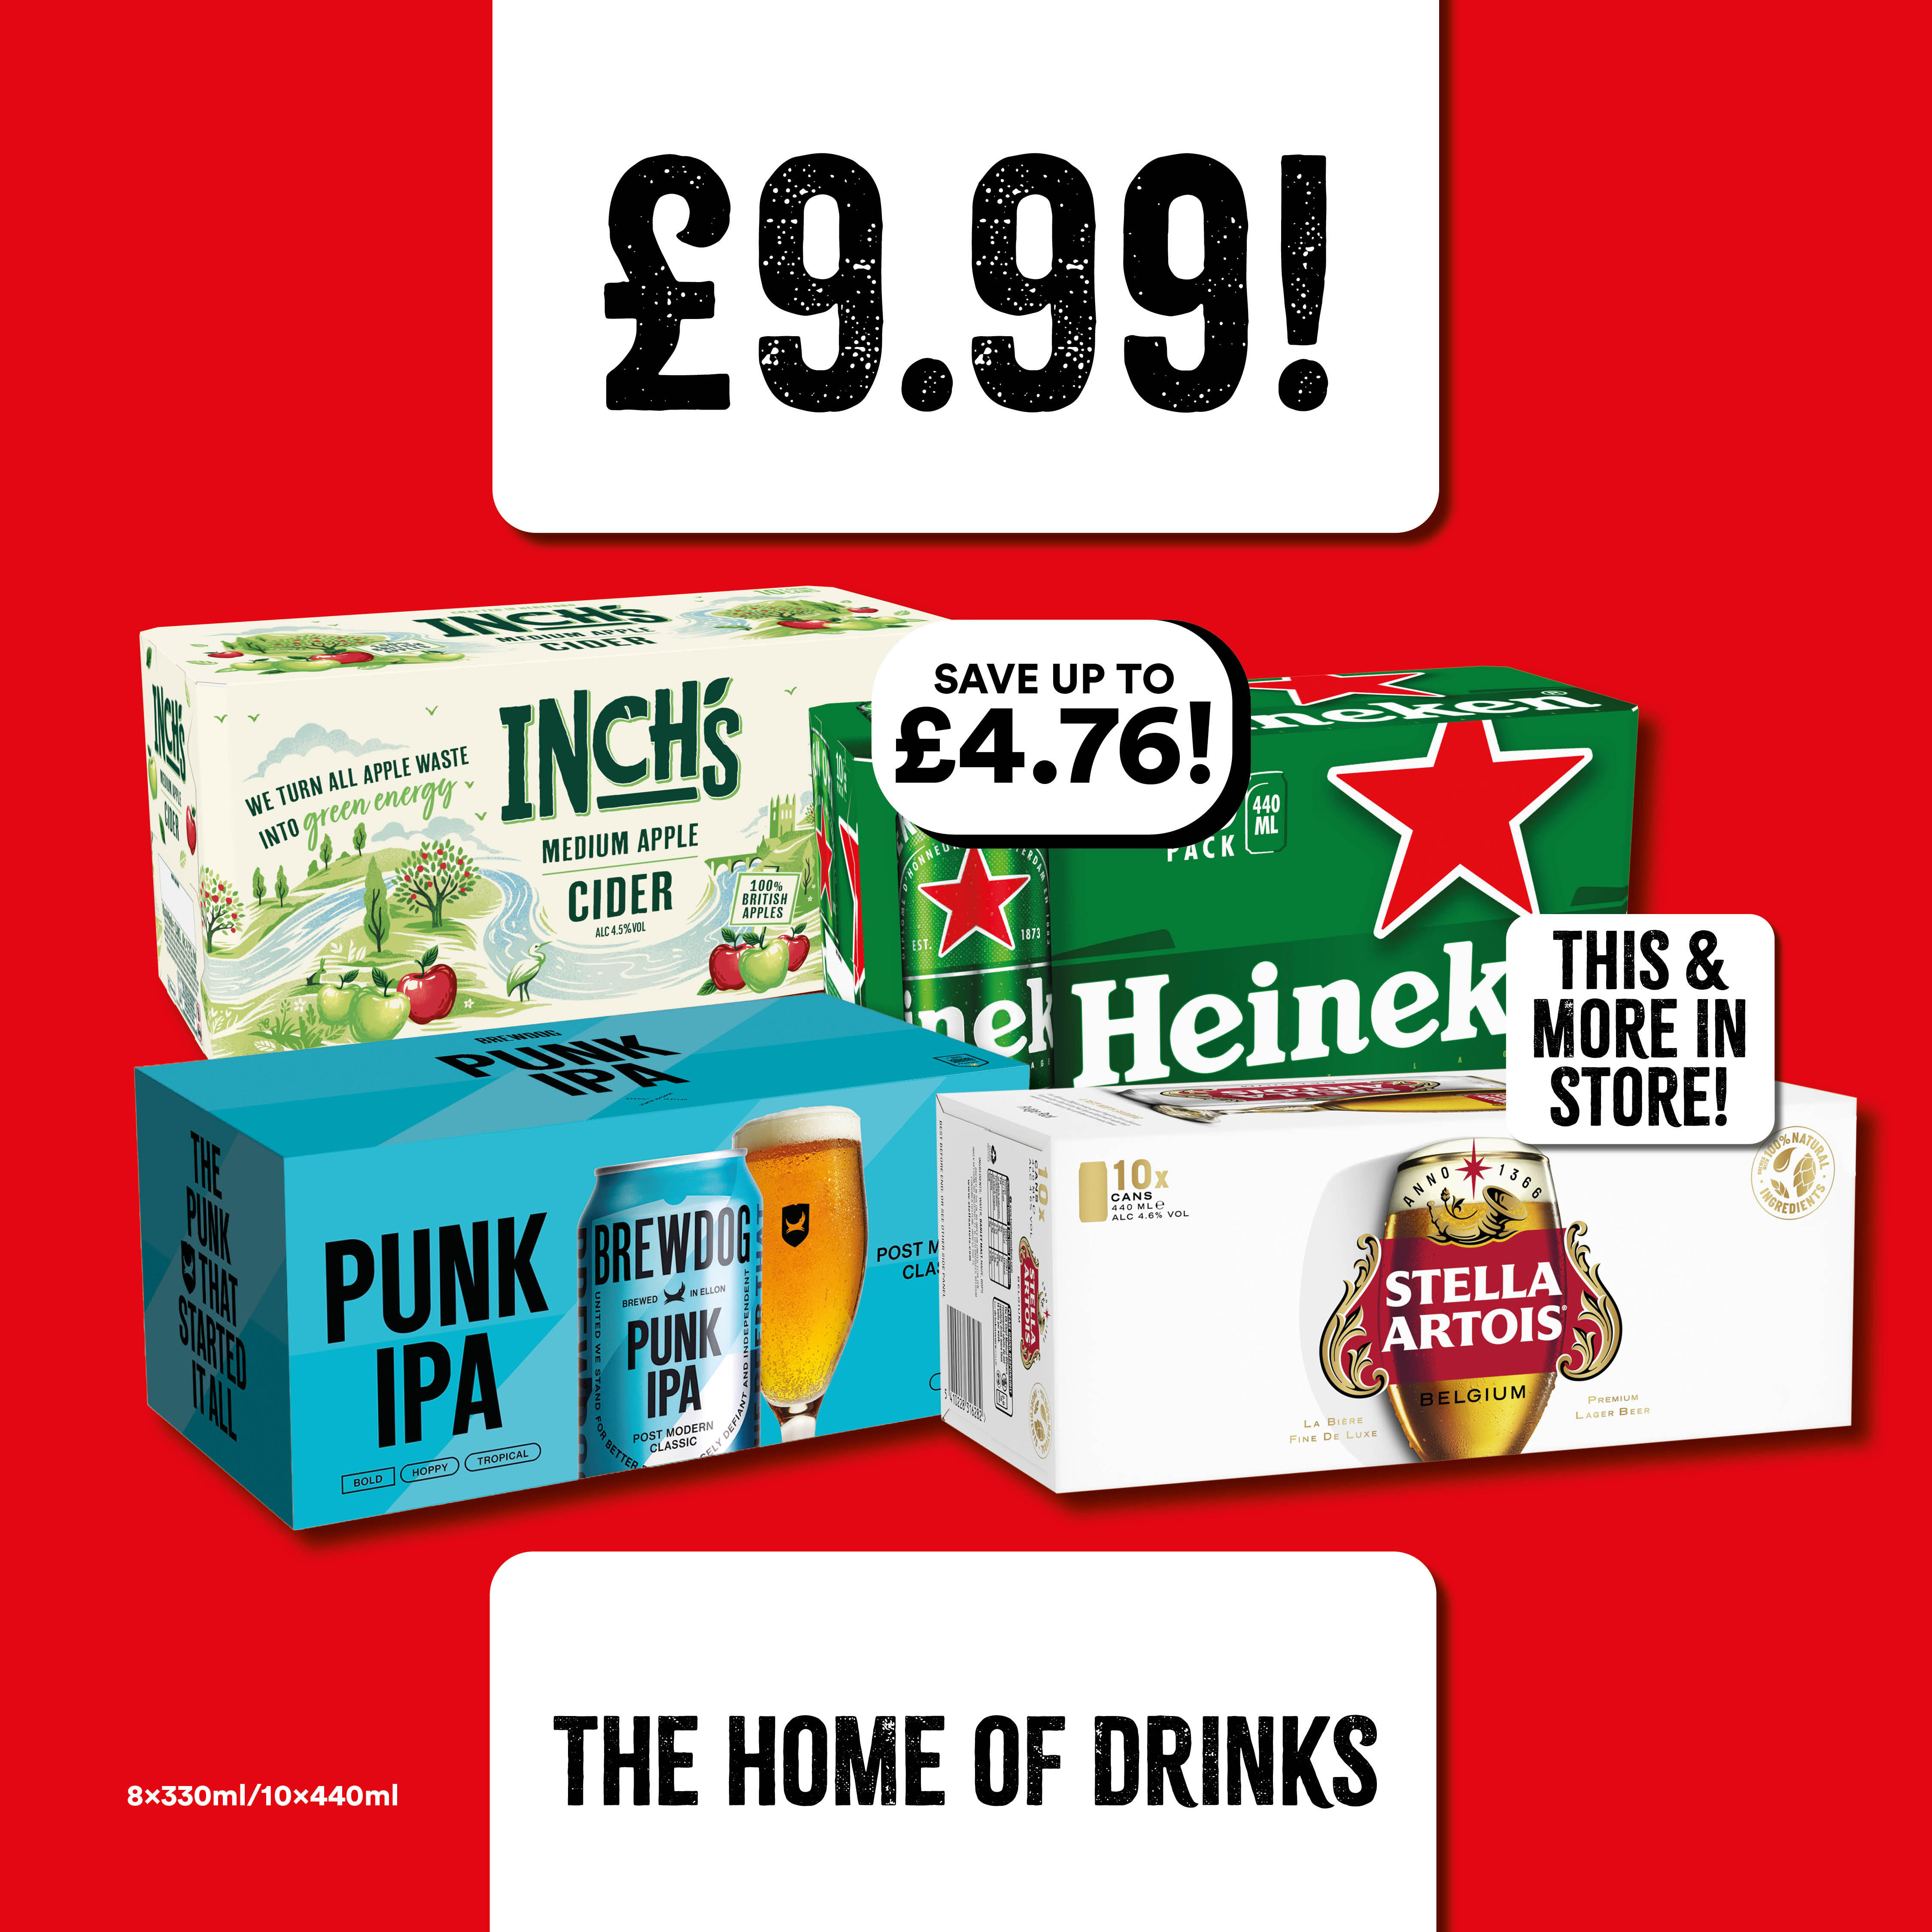 Beers 8 x 330ml/10 x 440ml 
Only £9.99 Bargain Booze Select Convenience Laugharne 01994 426984